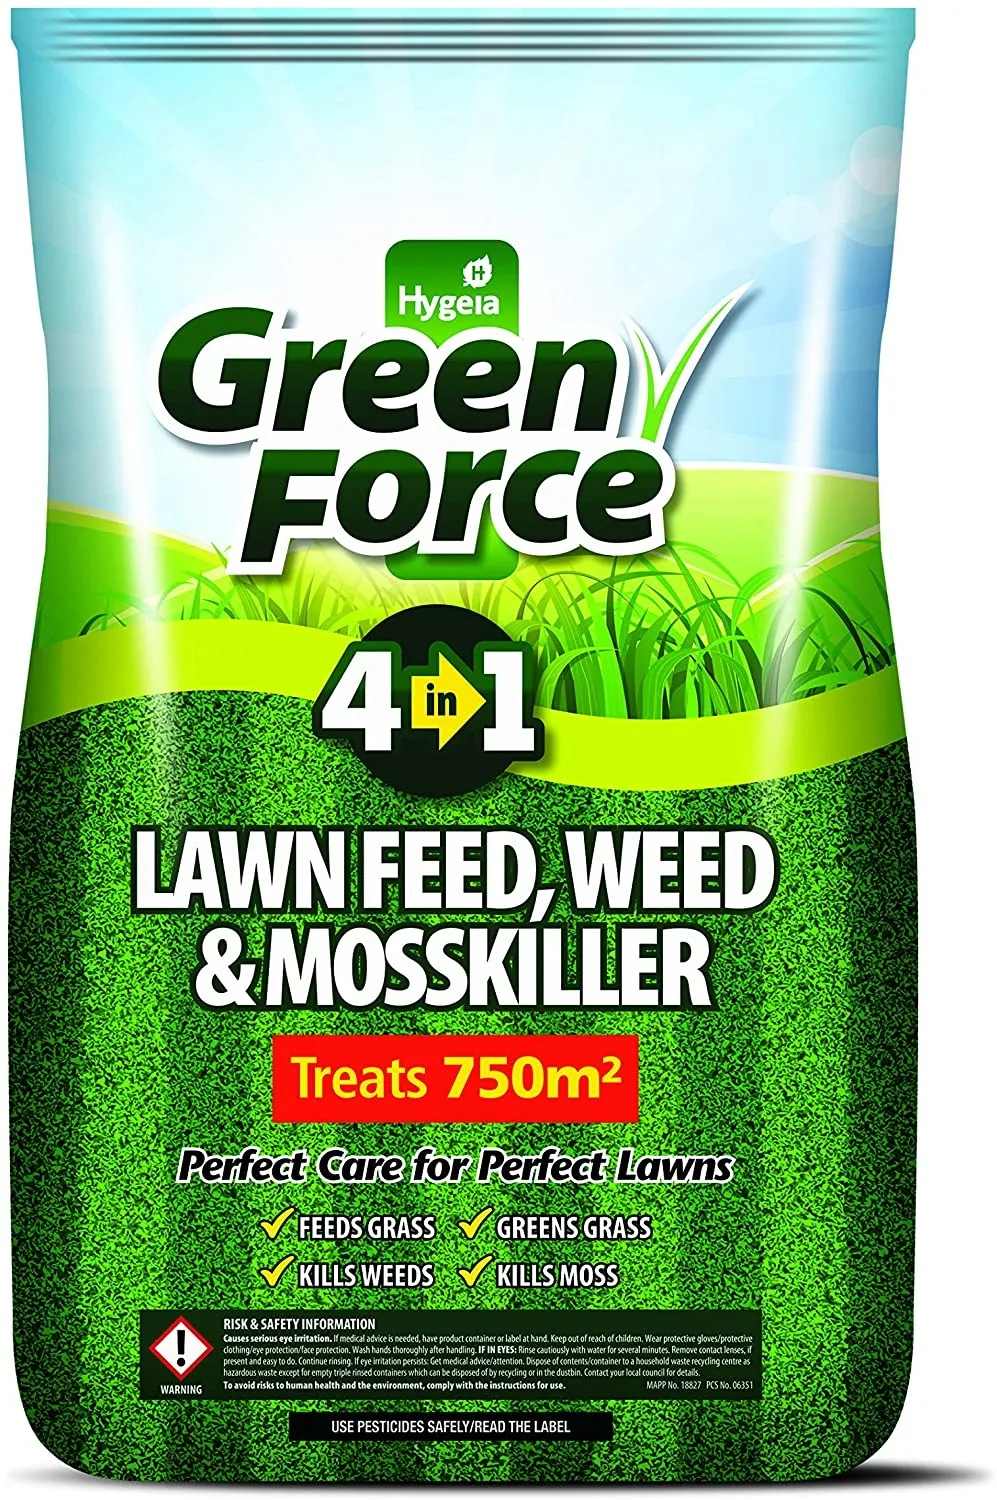 Green Force - Lawn Feed Weed & Mosskiller 15kg